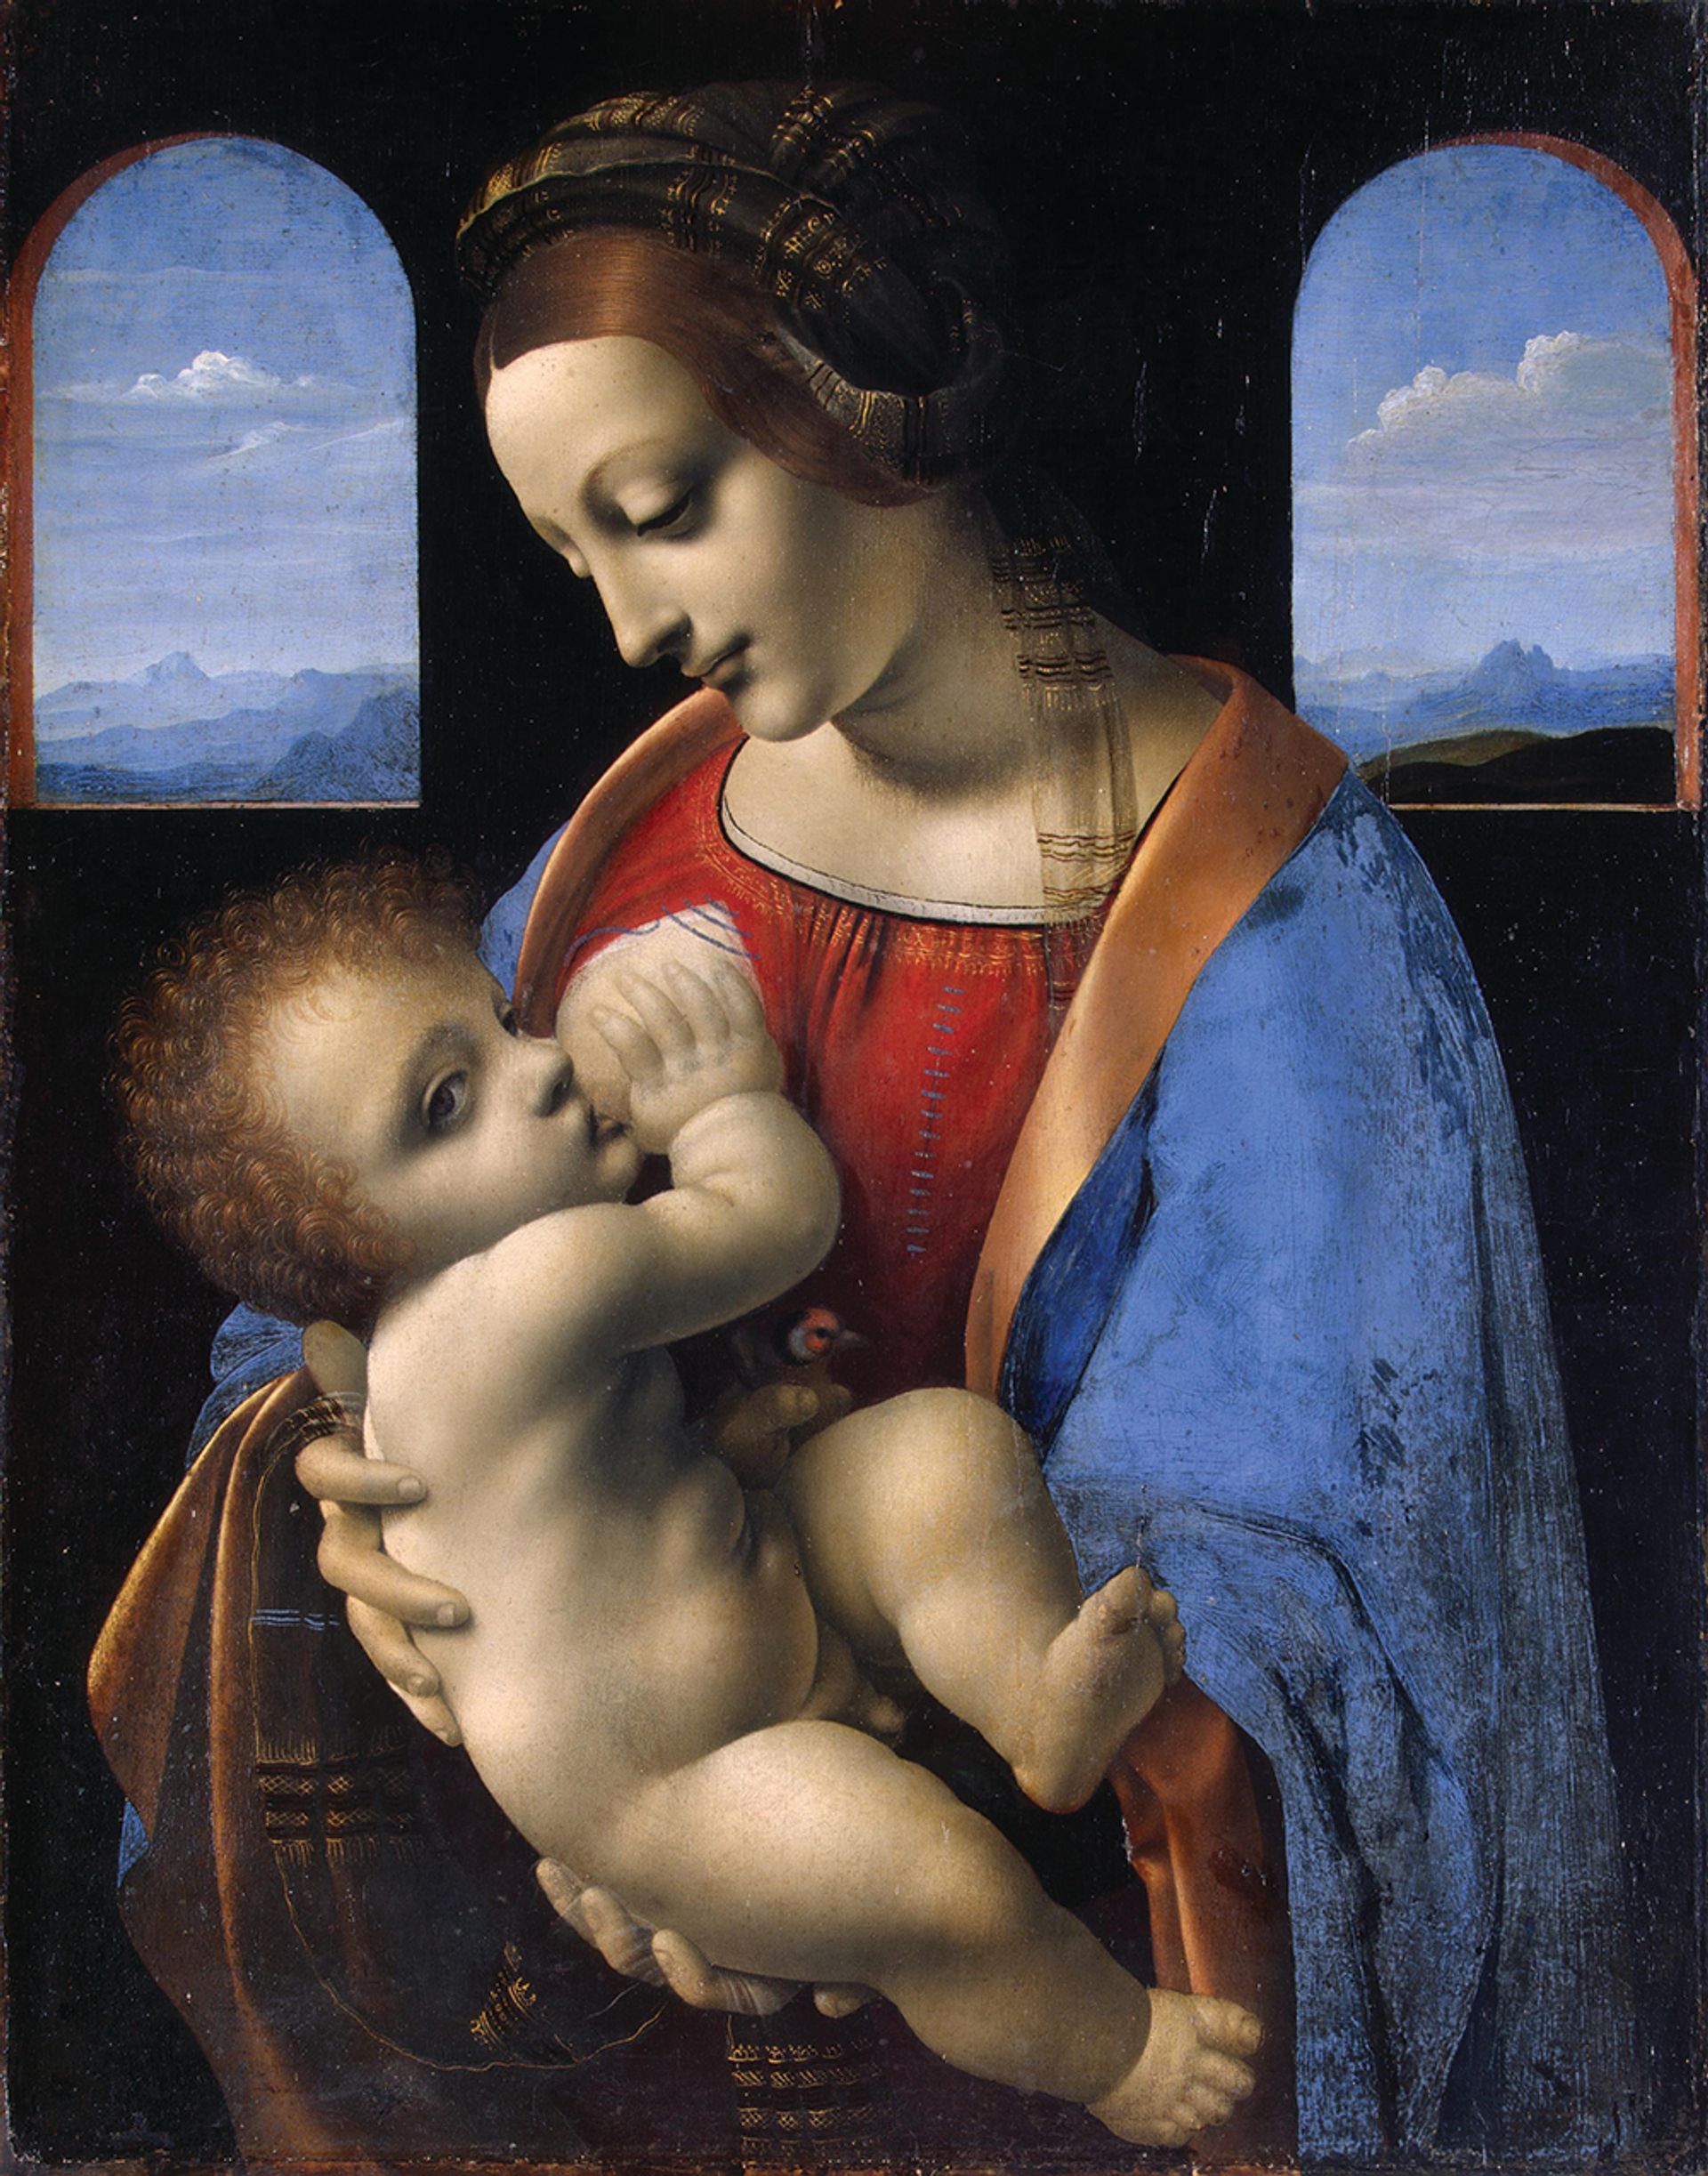 the Litta Madonna will go on show at Milan’s Museo Poldi Pezzoli © The State Hermitage Museum